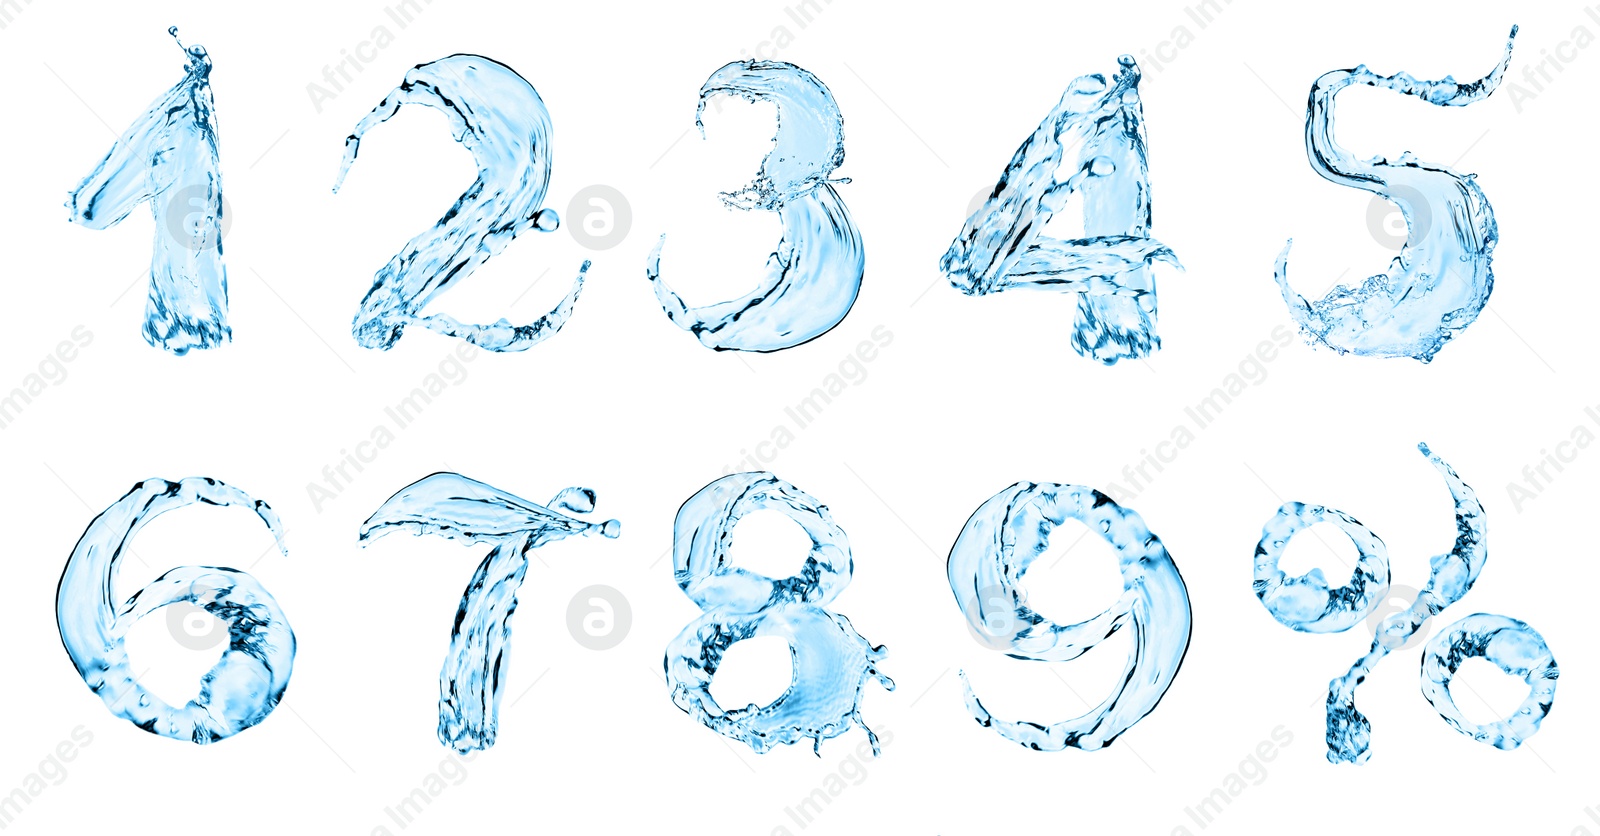 Illustration of Numbers and percent sign made of water on white background, collage design